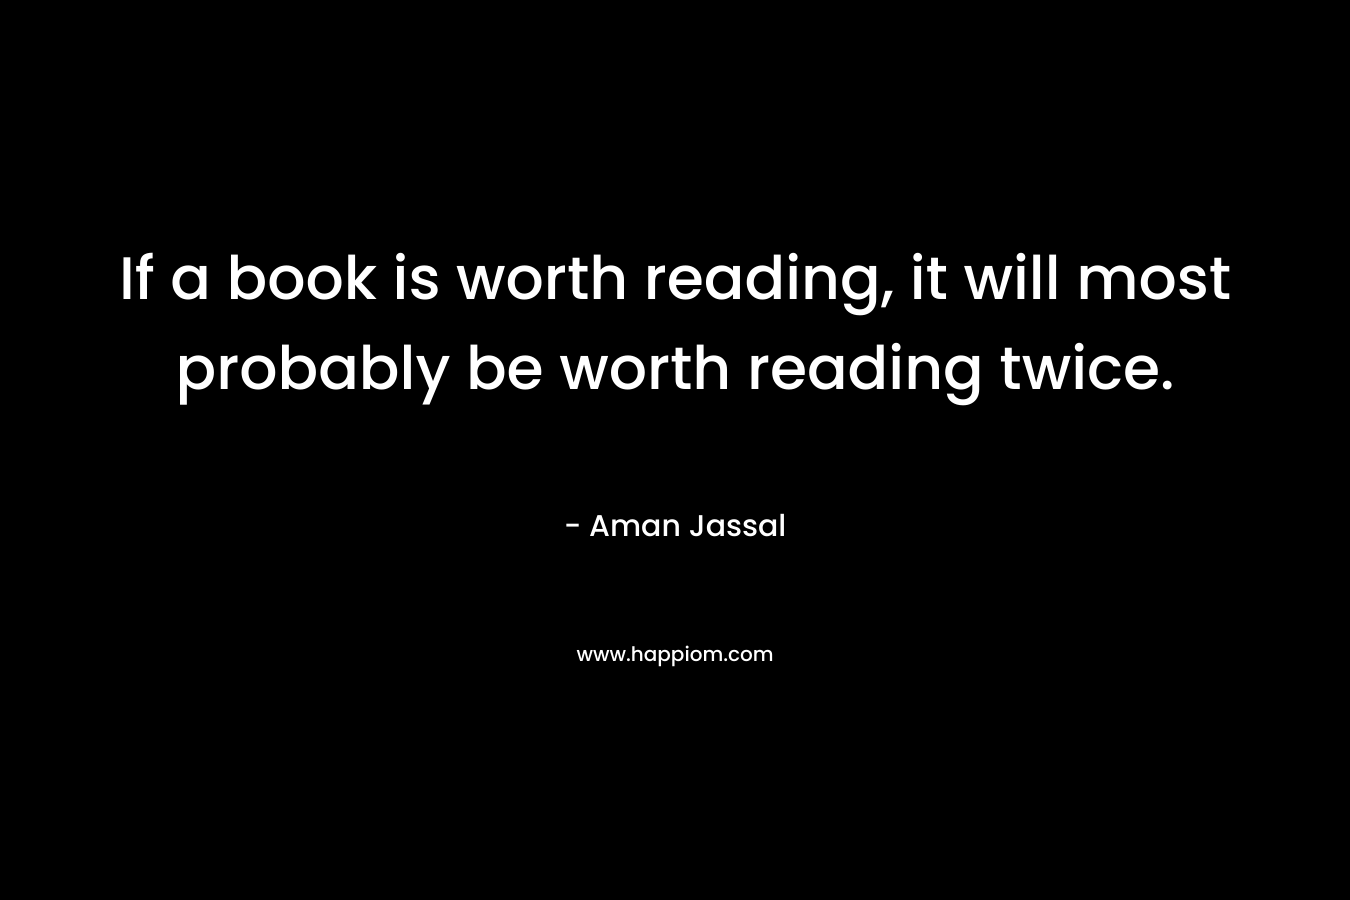 If a book is worth reading, it will most probably be worth reading twice. – Aman Jassal